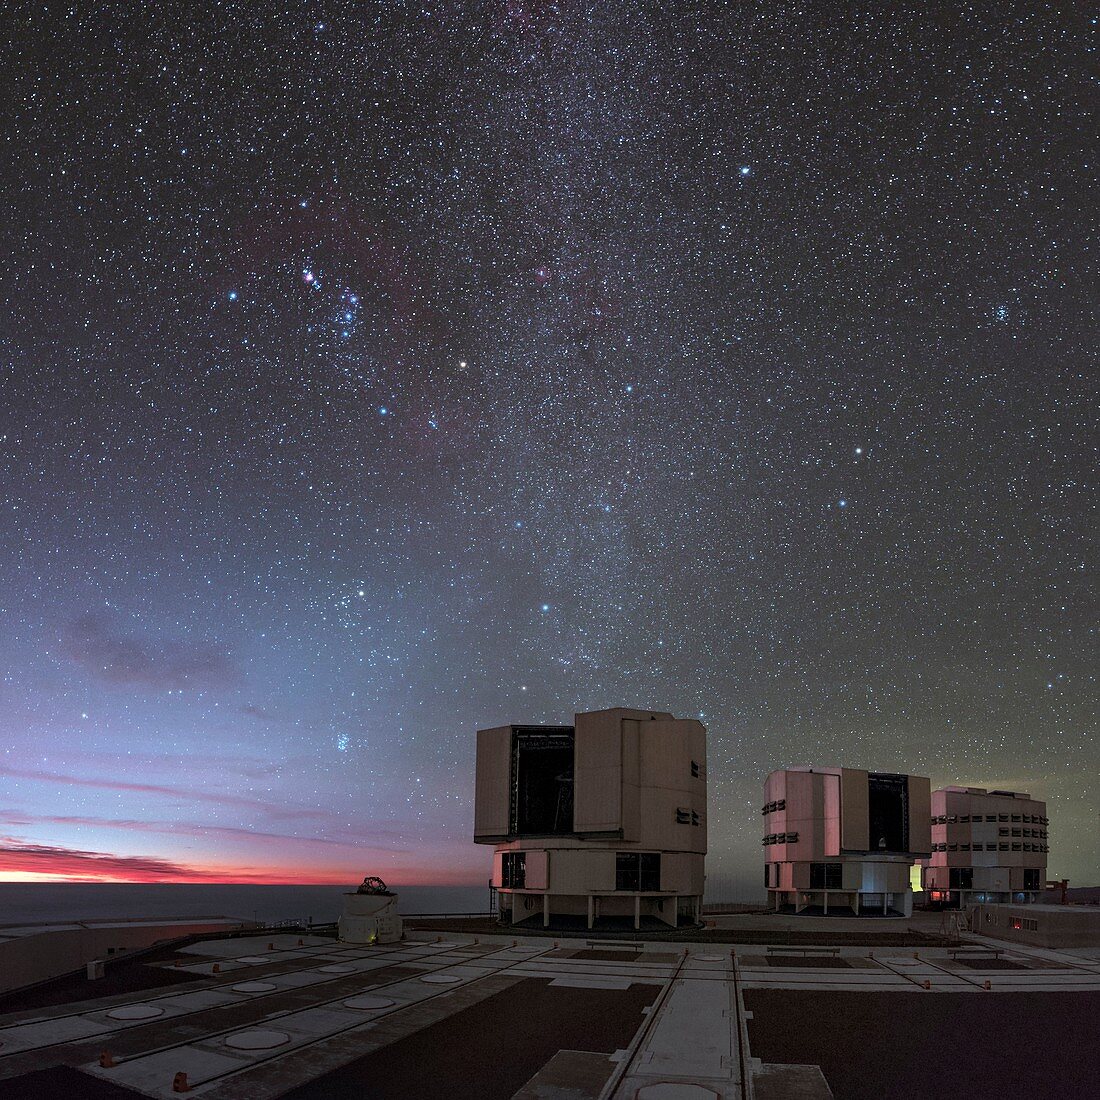 Night sky over Very Large Telescope, Chile